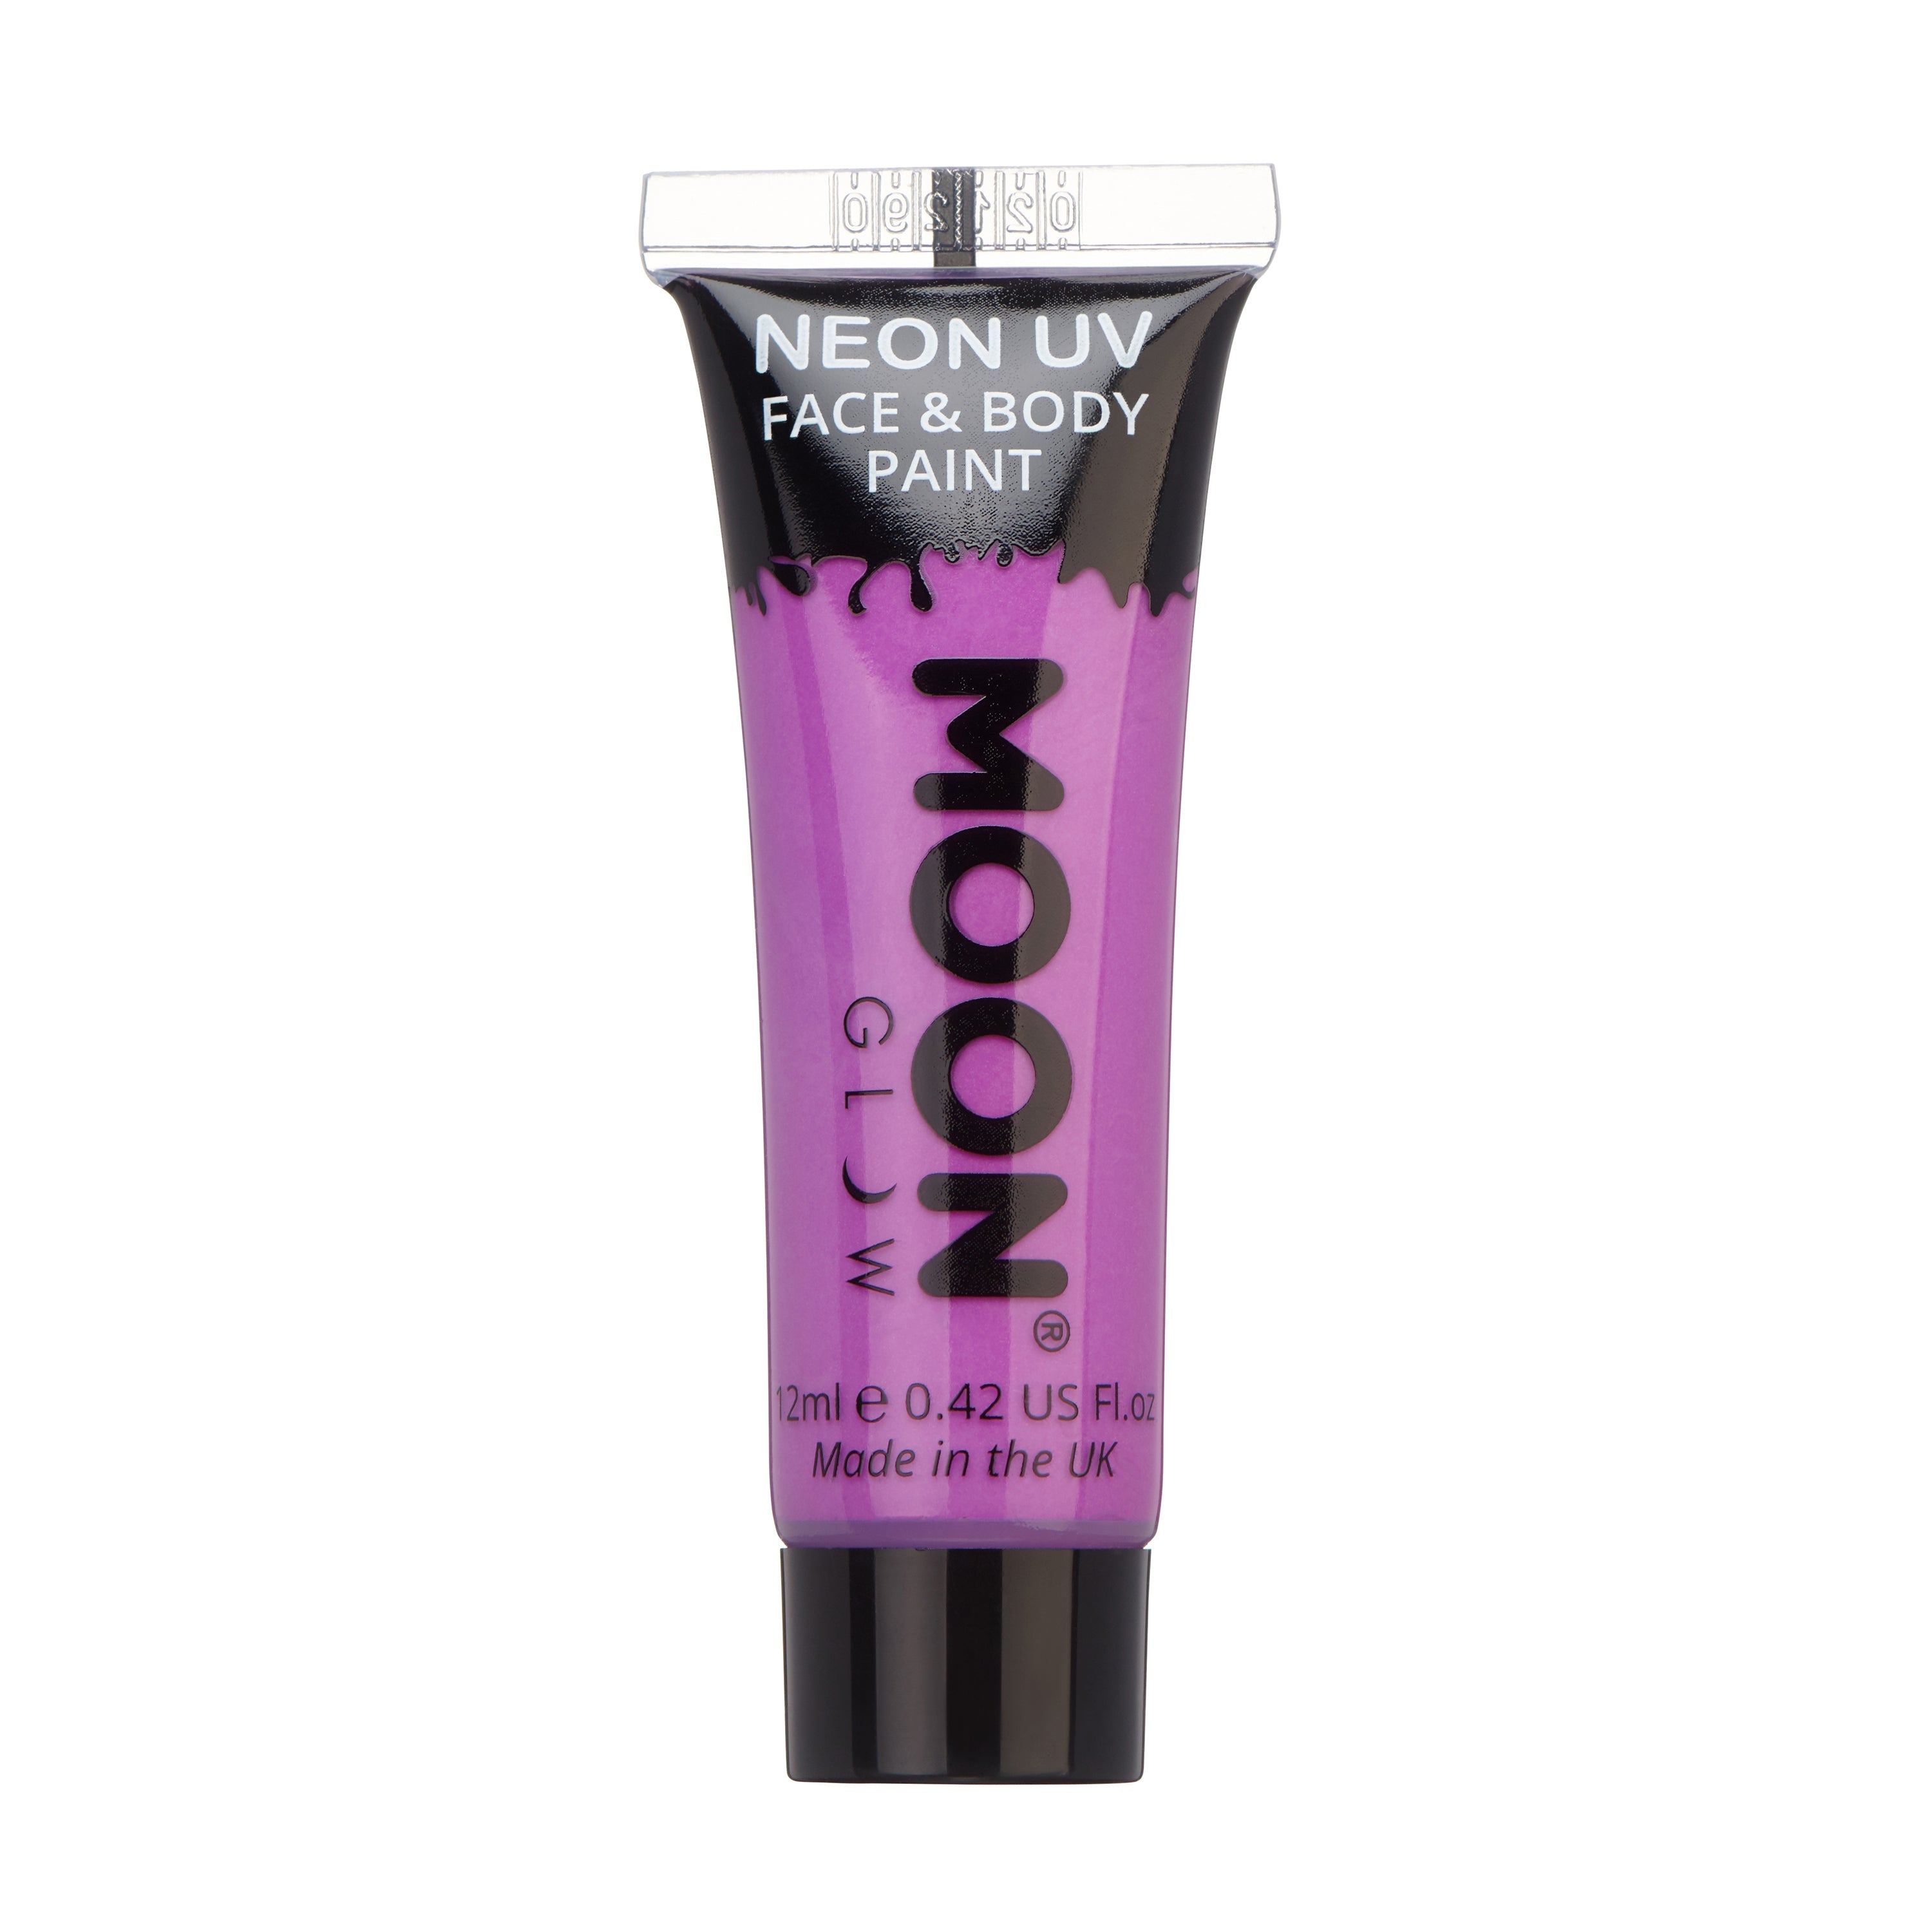 Intense Purple - Neon UV Glow Blacklight Face & Body Paint Makeup, 12mL. Cosmetically certified, FDA & Health Canada compliant, cruelty free and vegan.